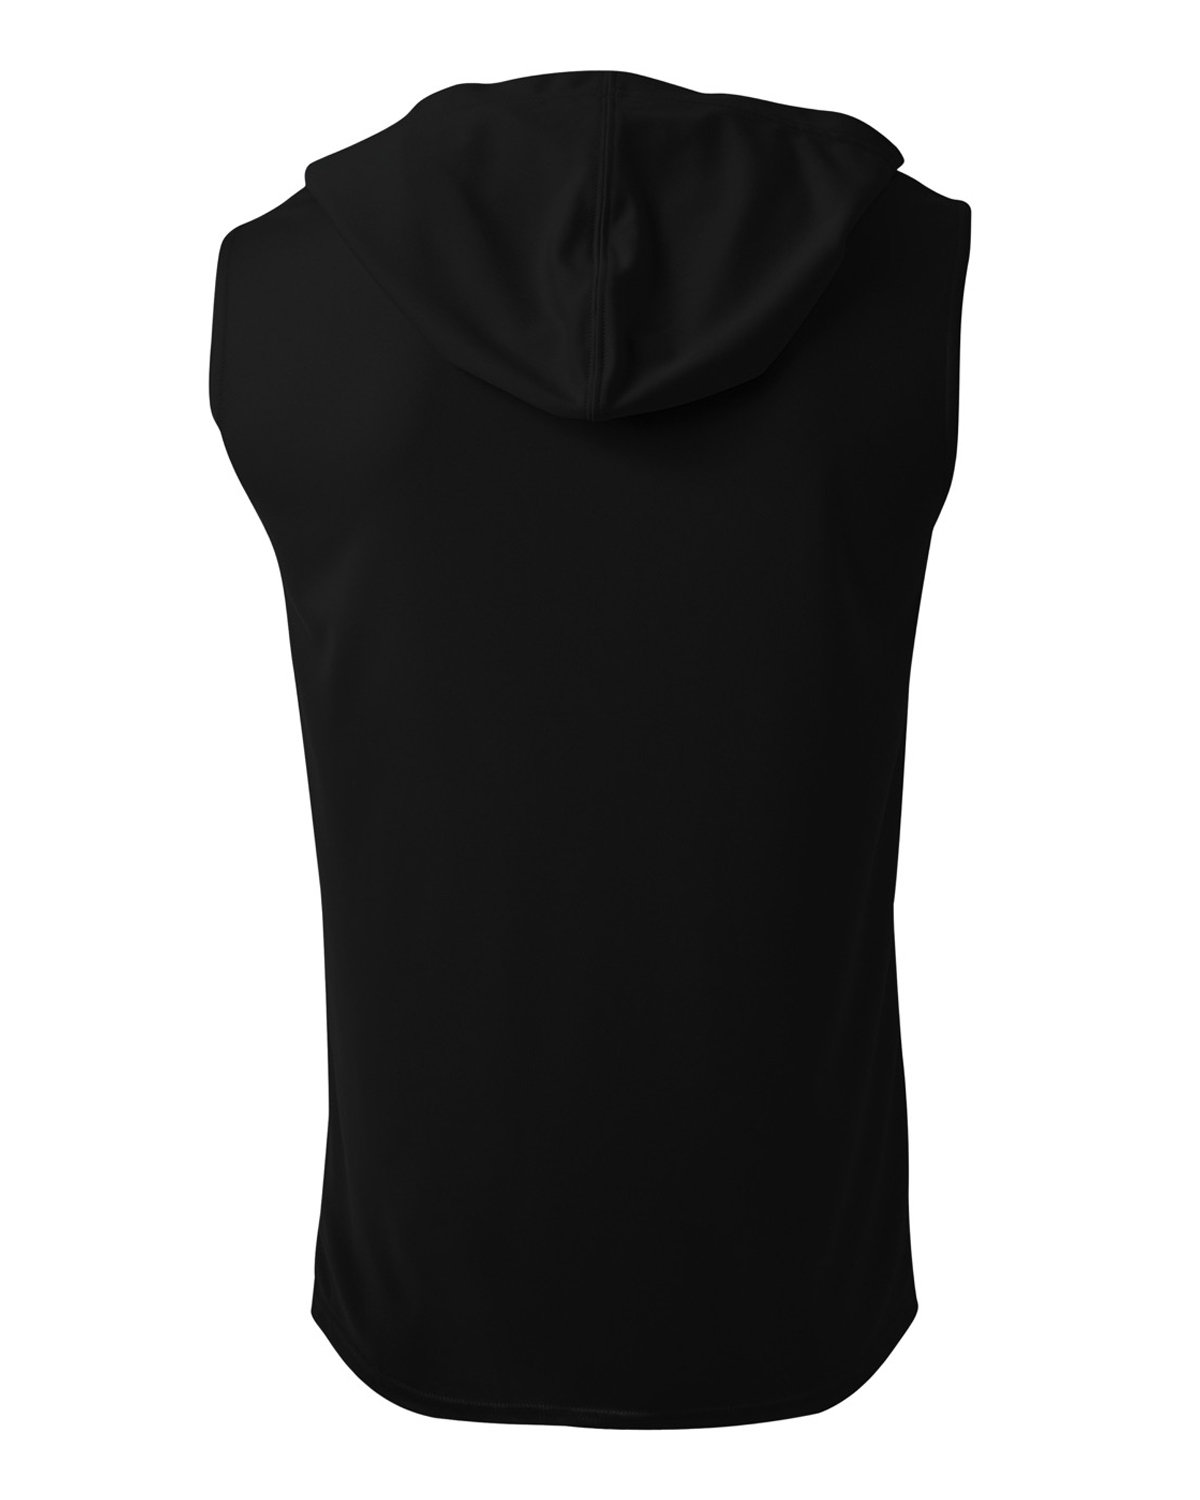 A4 Youth Sleeveless Hooded T-Shirt | alphabroder